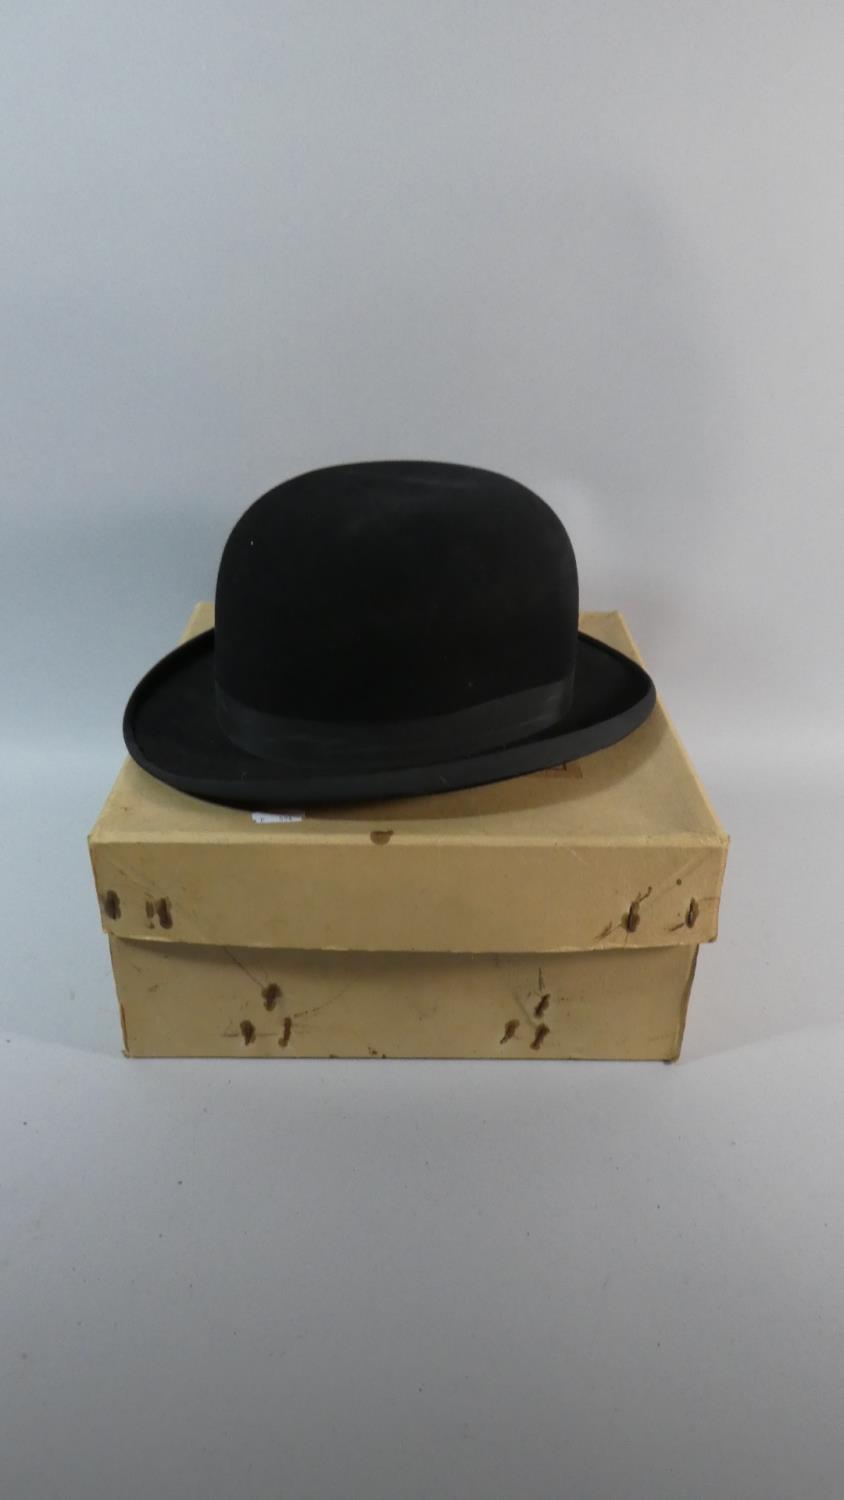 A Falcon Bowler Hat Six 6 7/8th in Gieves Cardboard Box